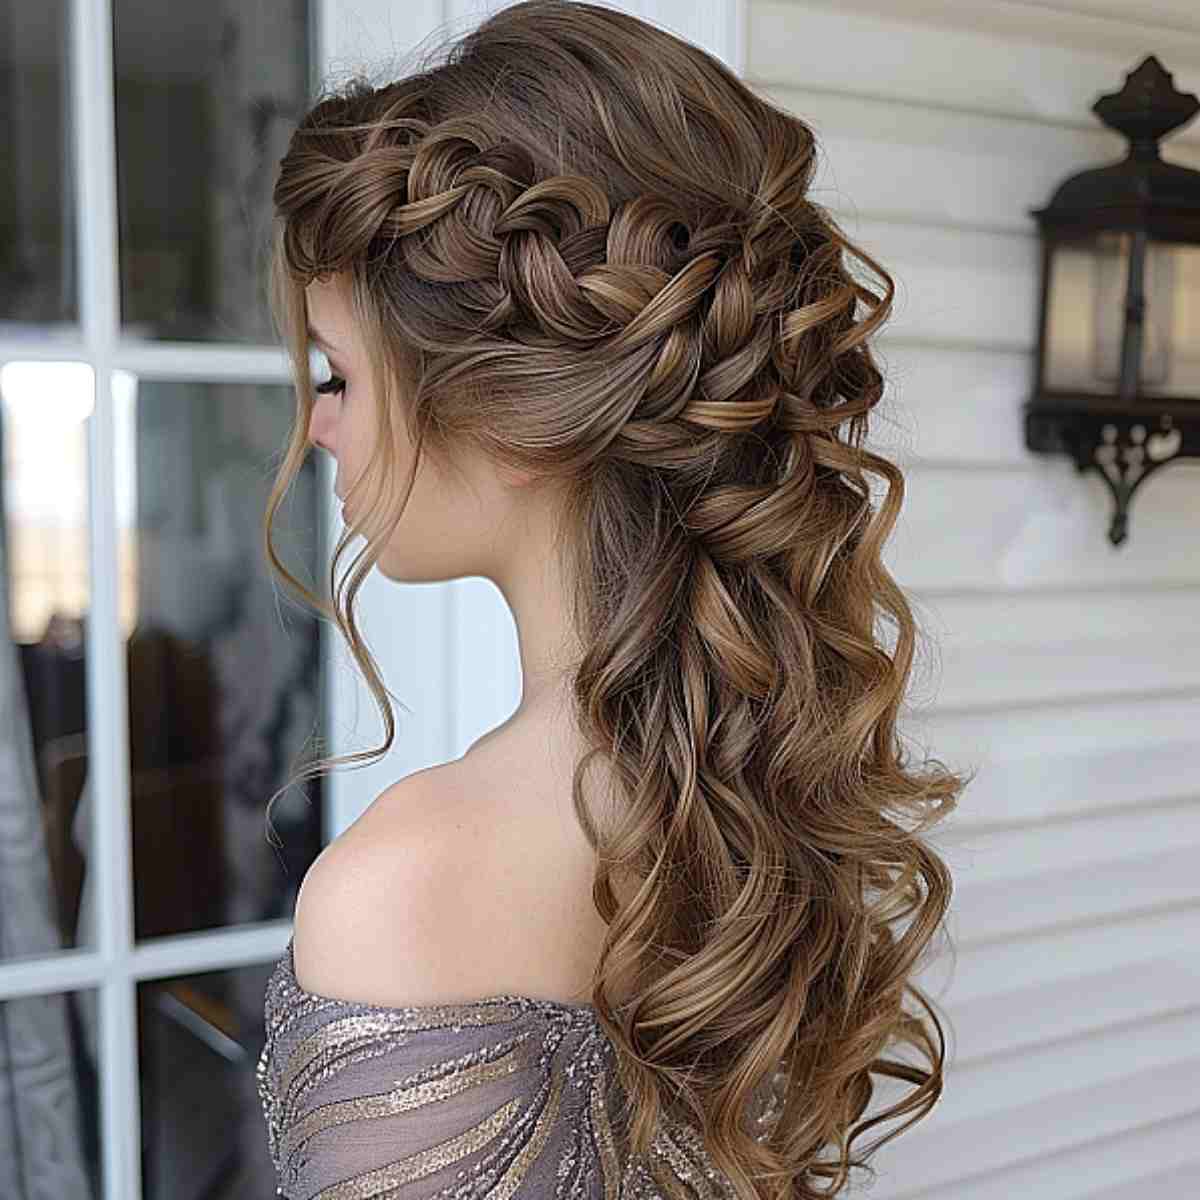 Romantic Prom Hair With Swept Up Curls